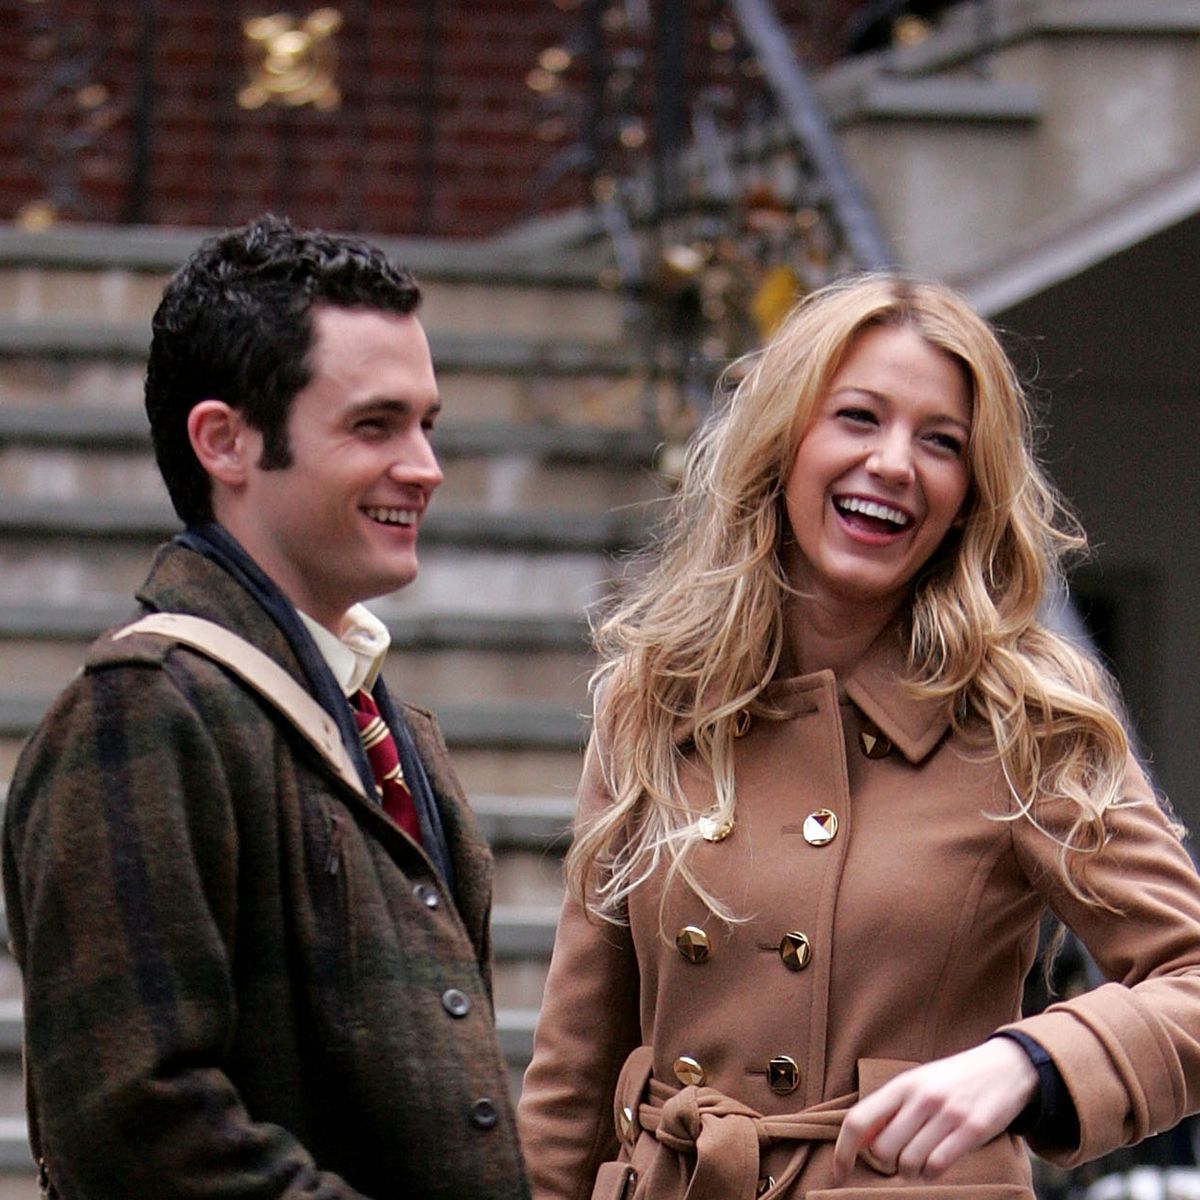 Blake Lively Calls Out Gossip Girl Ending in Hilarious Instagram Post